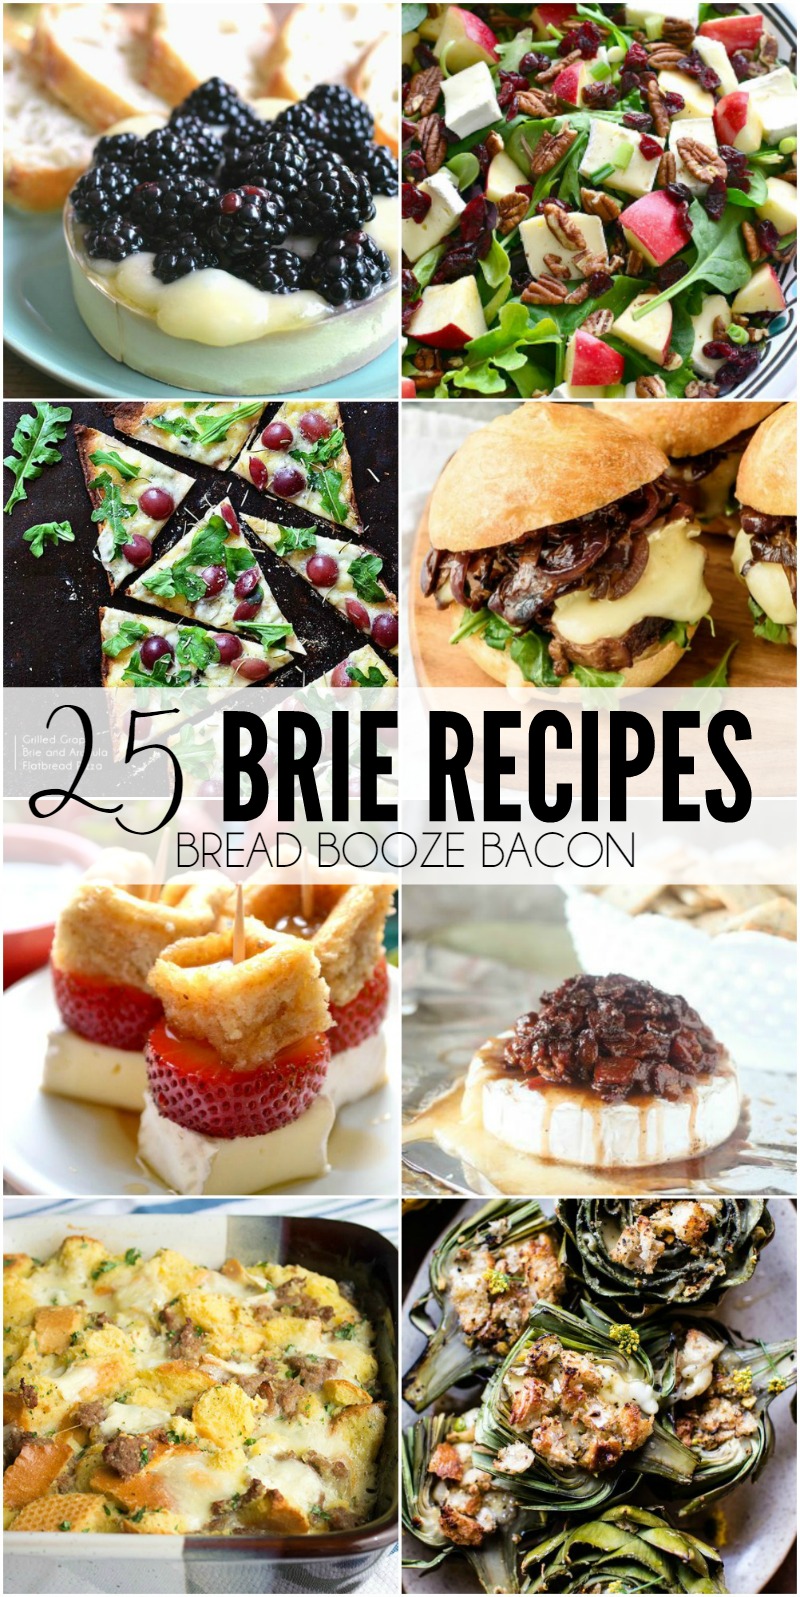 Is there anything better than ooey gooey cheese?! These 25 Brie Recipes will satisfy your cravings for all things creamy and delectable any time of day!sfy your cravings for all things creamy and delectable anytime of day!